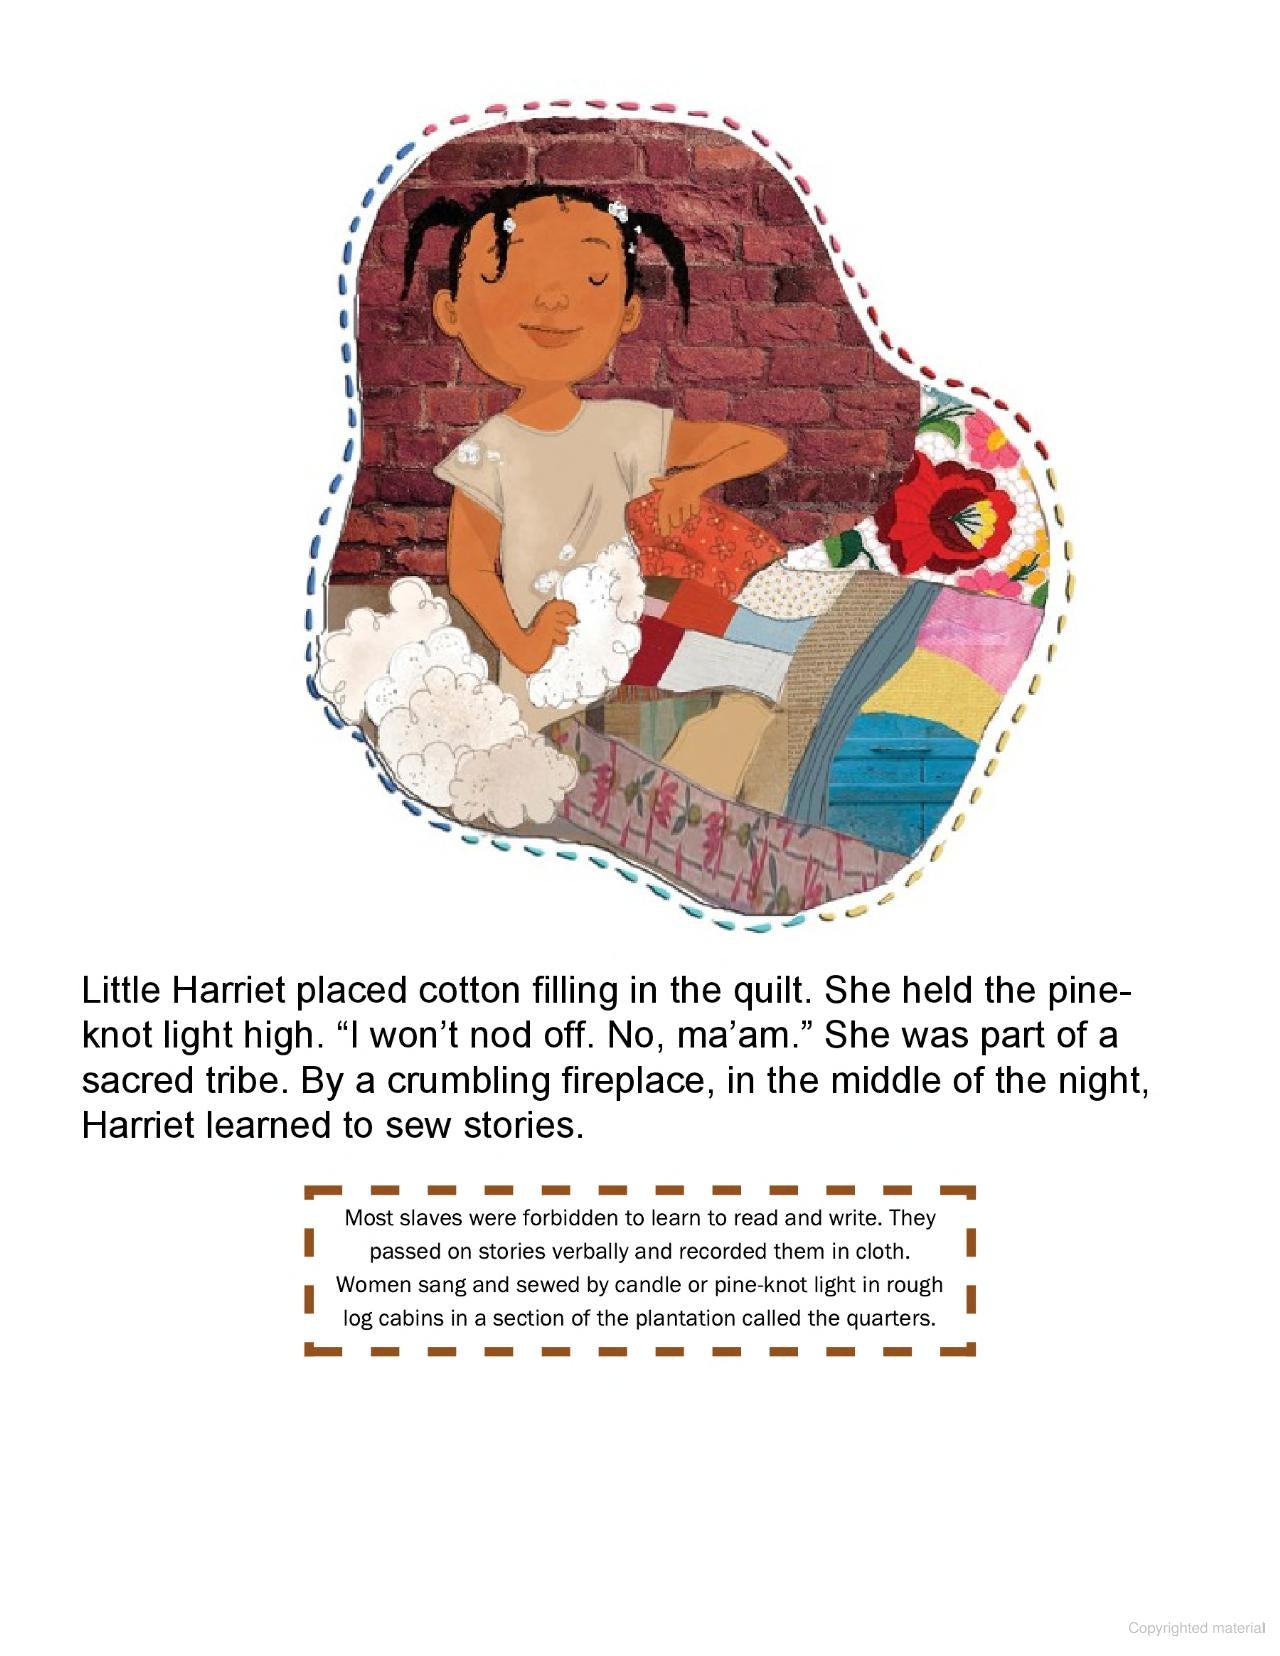 Sewing Stories : Harriet Powers' Journey from Slave to Artist